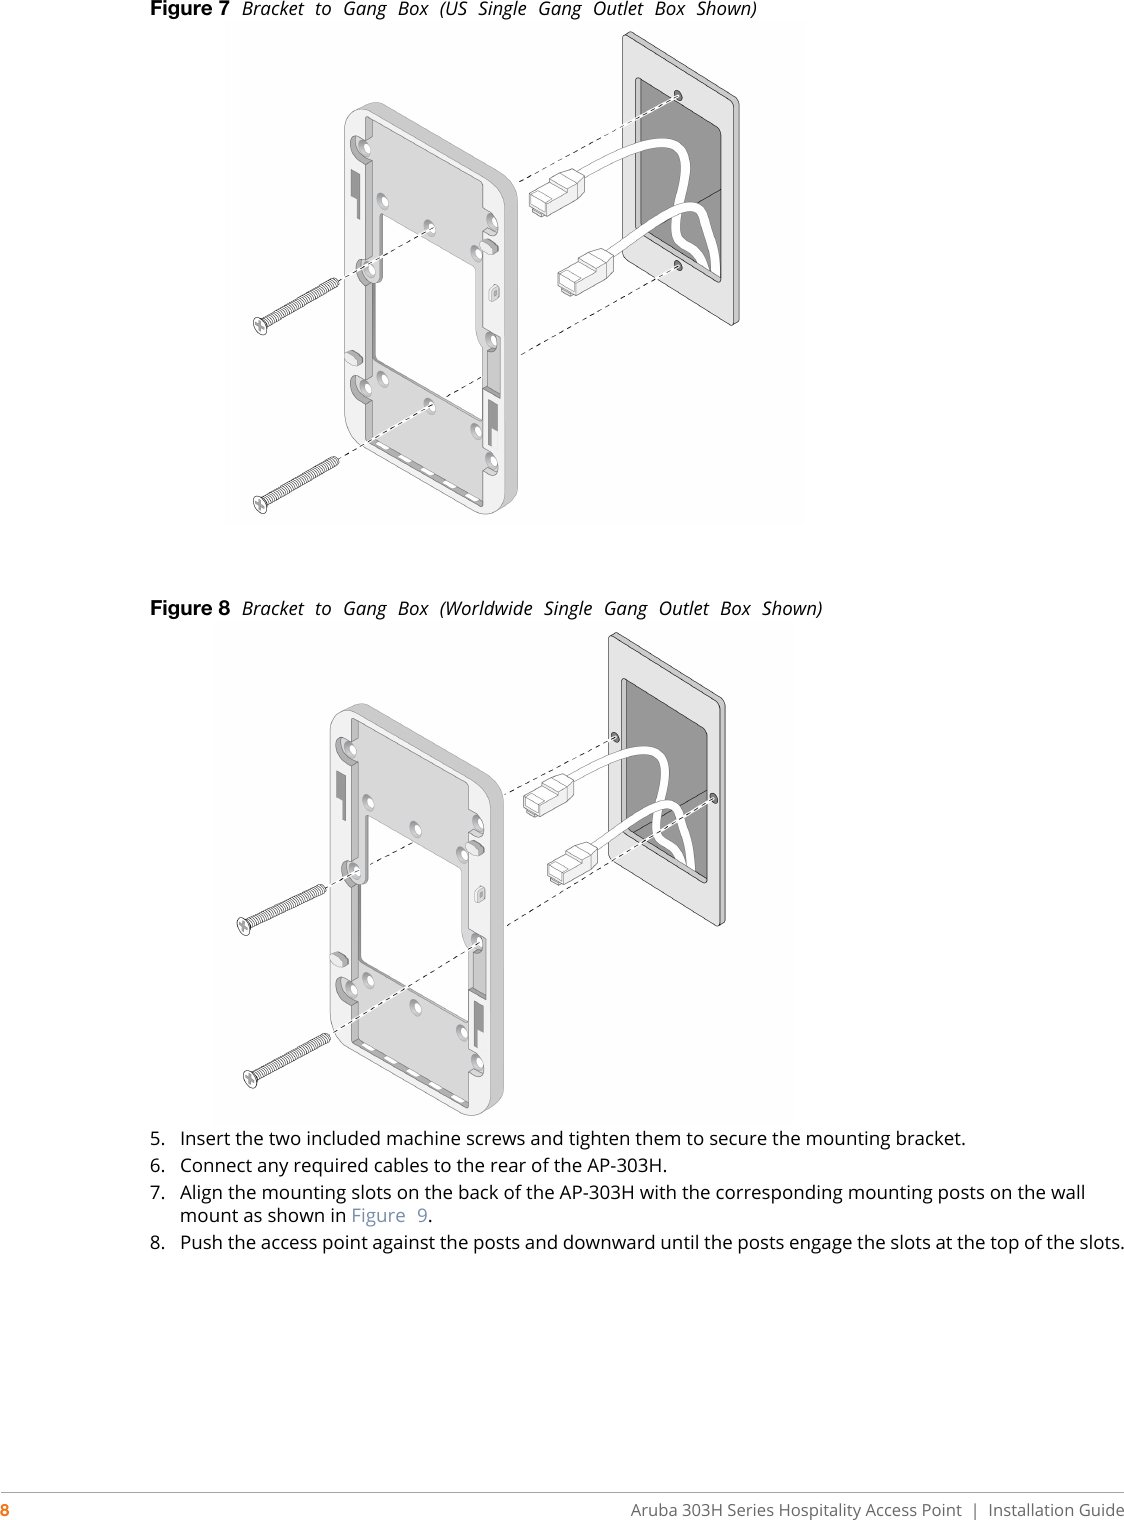 8Aruba 303H Series Hospitality Access Point  |   Installation GuideFigure 7  Bracket  to  Gang  Box  (US  Single  Gang  Outlet  Box  Shown)Figure 8  Bracket  to  Gang  Box  (Worldwide  Single  Gang  Outlet  Box  Shown)5. Insert the two included machine screws and tighten them to secure the mounting bracket.6. Connect any required cables to the rear of the AP-303H.7. Align the mounting slots on the back of the AP-303H with the corresponding mounting posts on the wall mount as shown in Figure  9.8. Push the access point against the posts and downward until the posts engage the slots at the top of the slots.